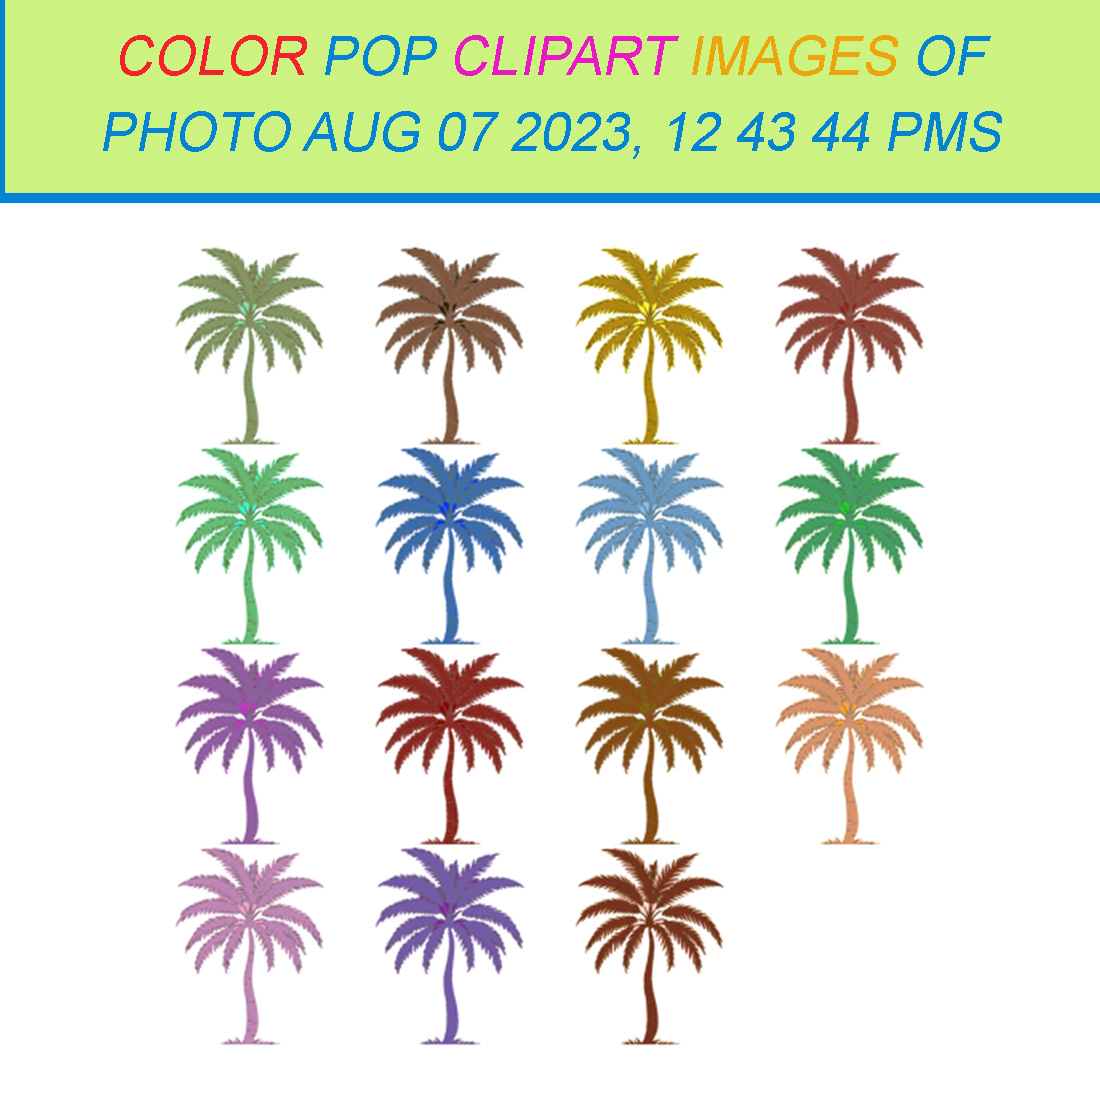 15 COLOR POP CLIPART IMAGES OF PHOTO AUG 07 2023, 12 43 44 PMS cover image.